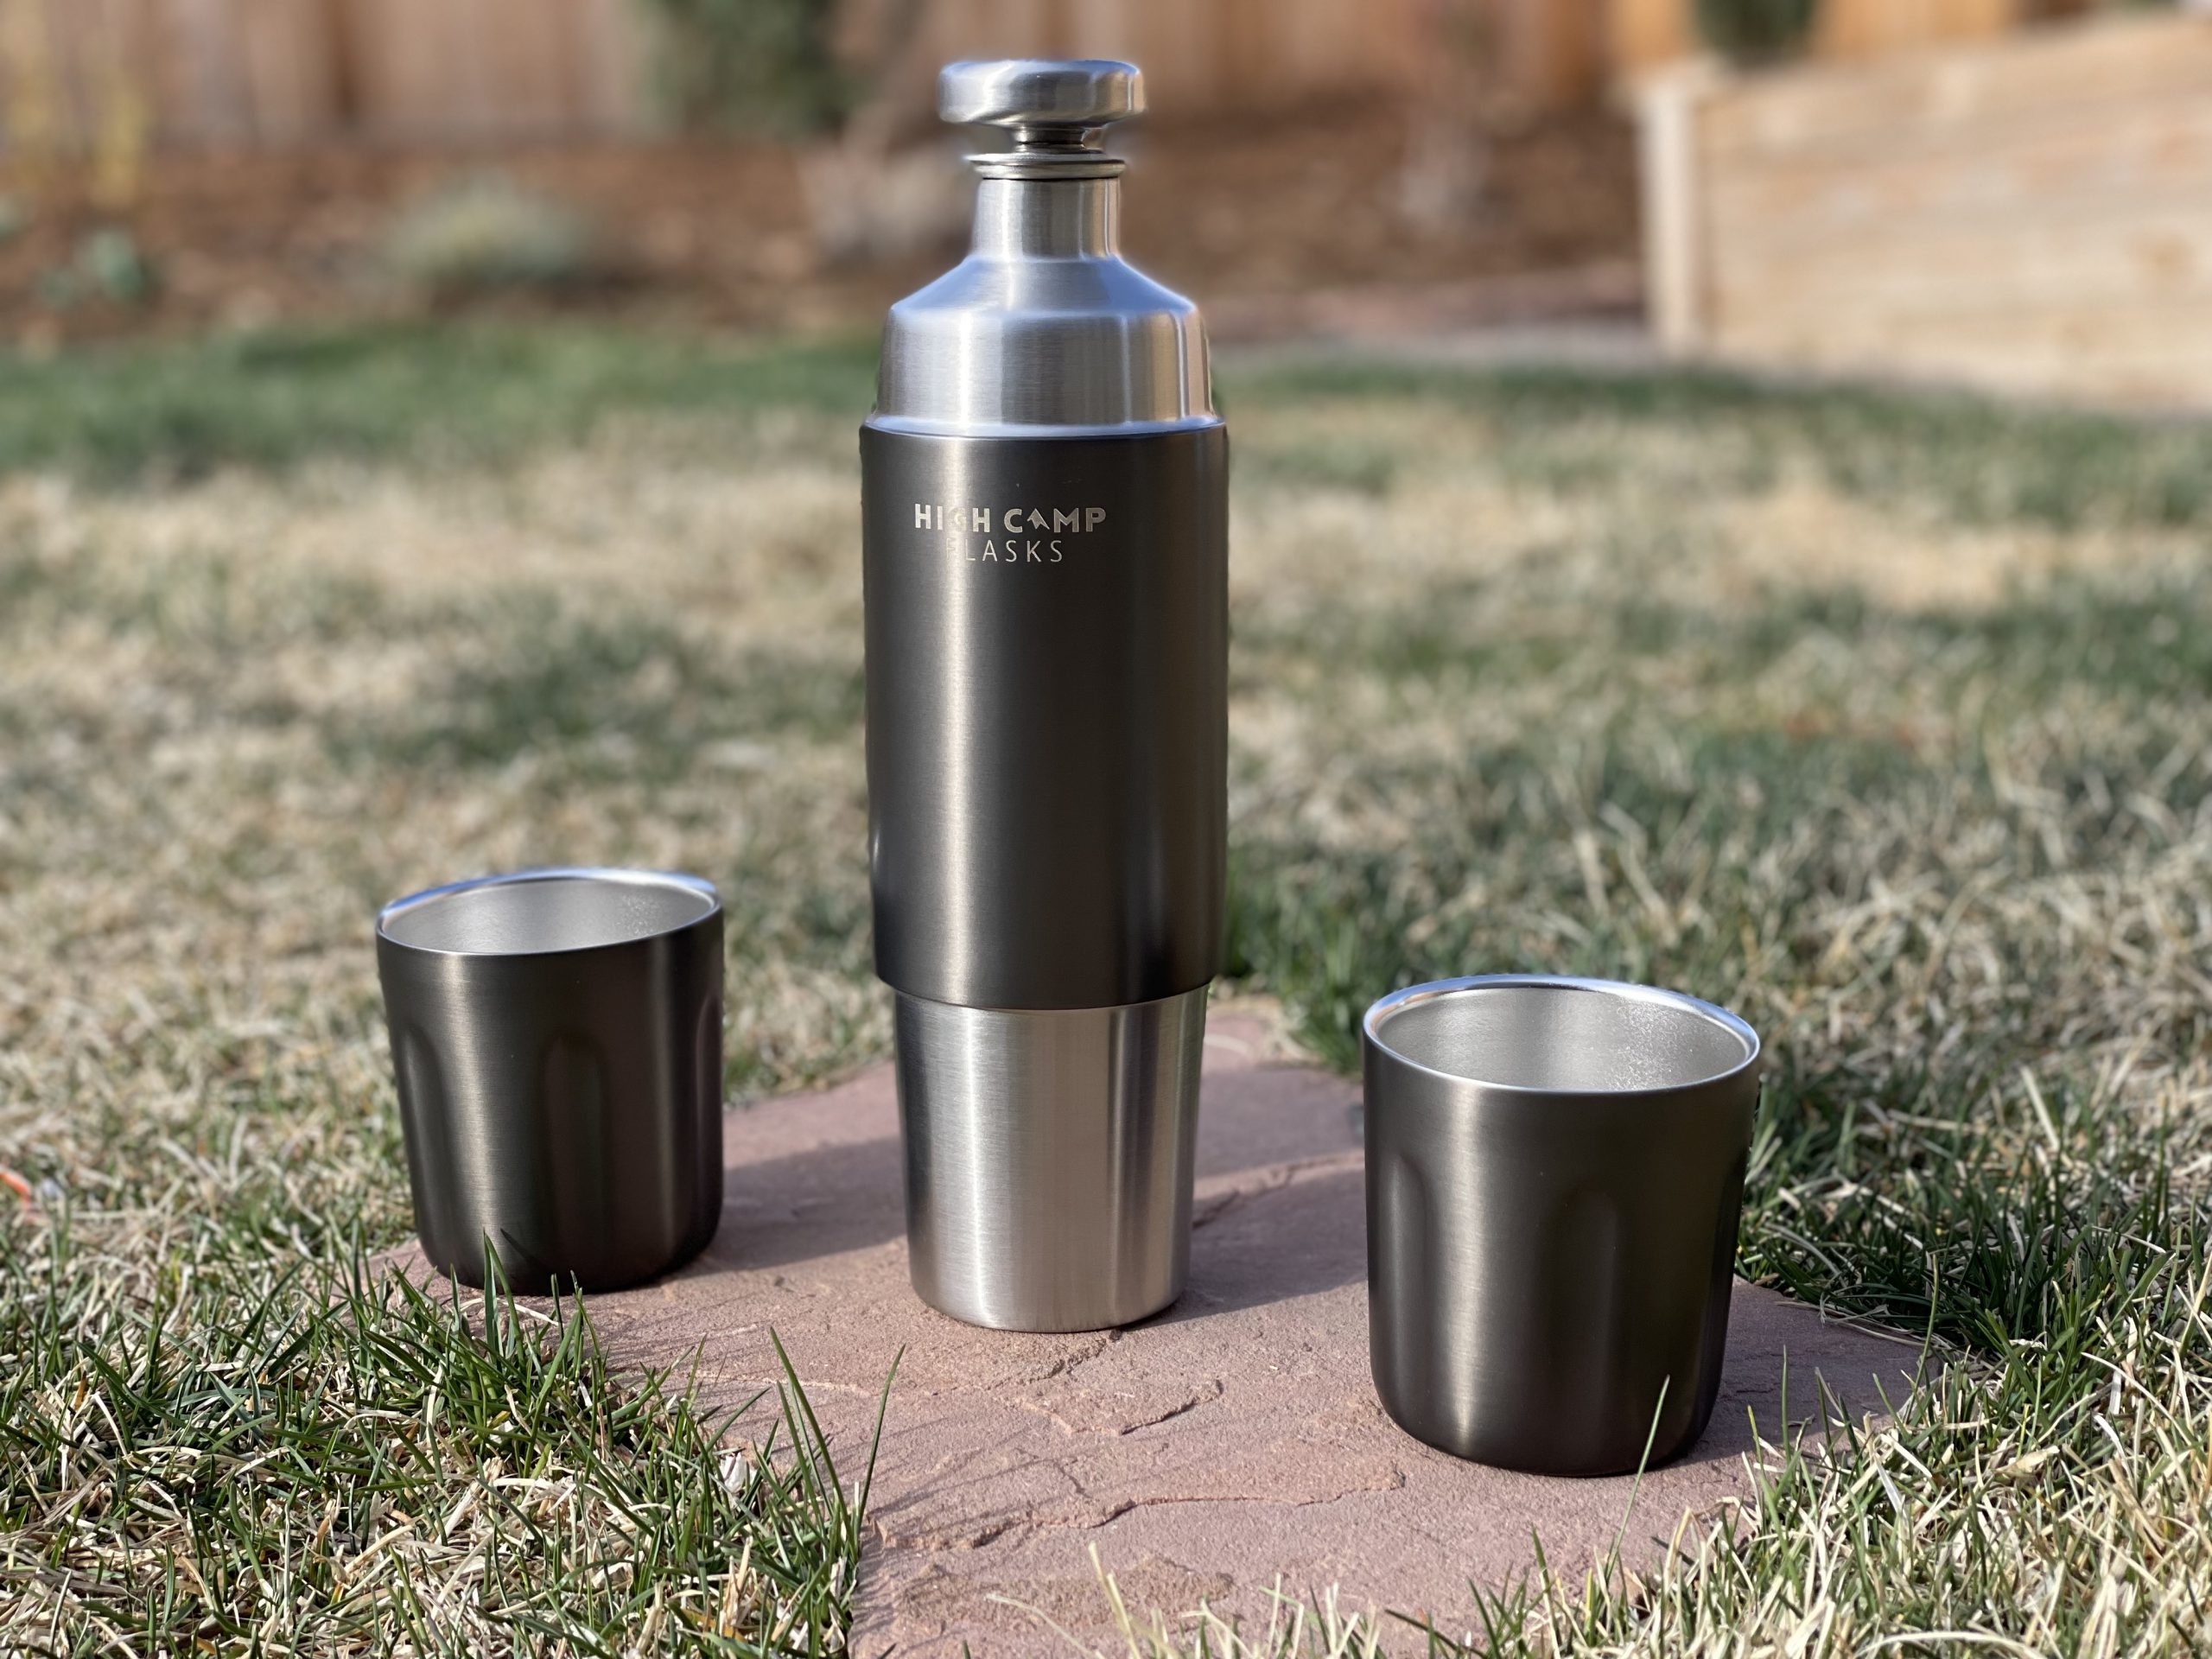 Review: High Camp Flask Torch Flask Elevates Your On-The-Go Libations 